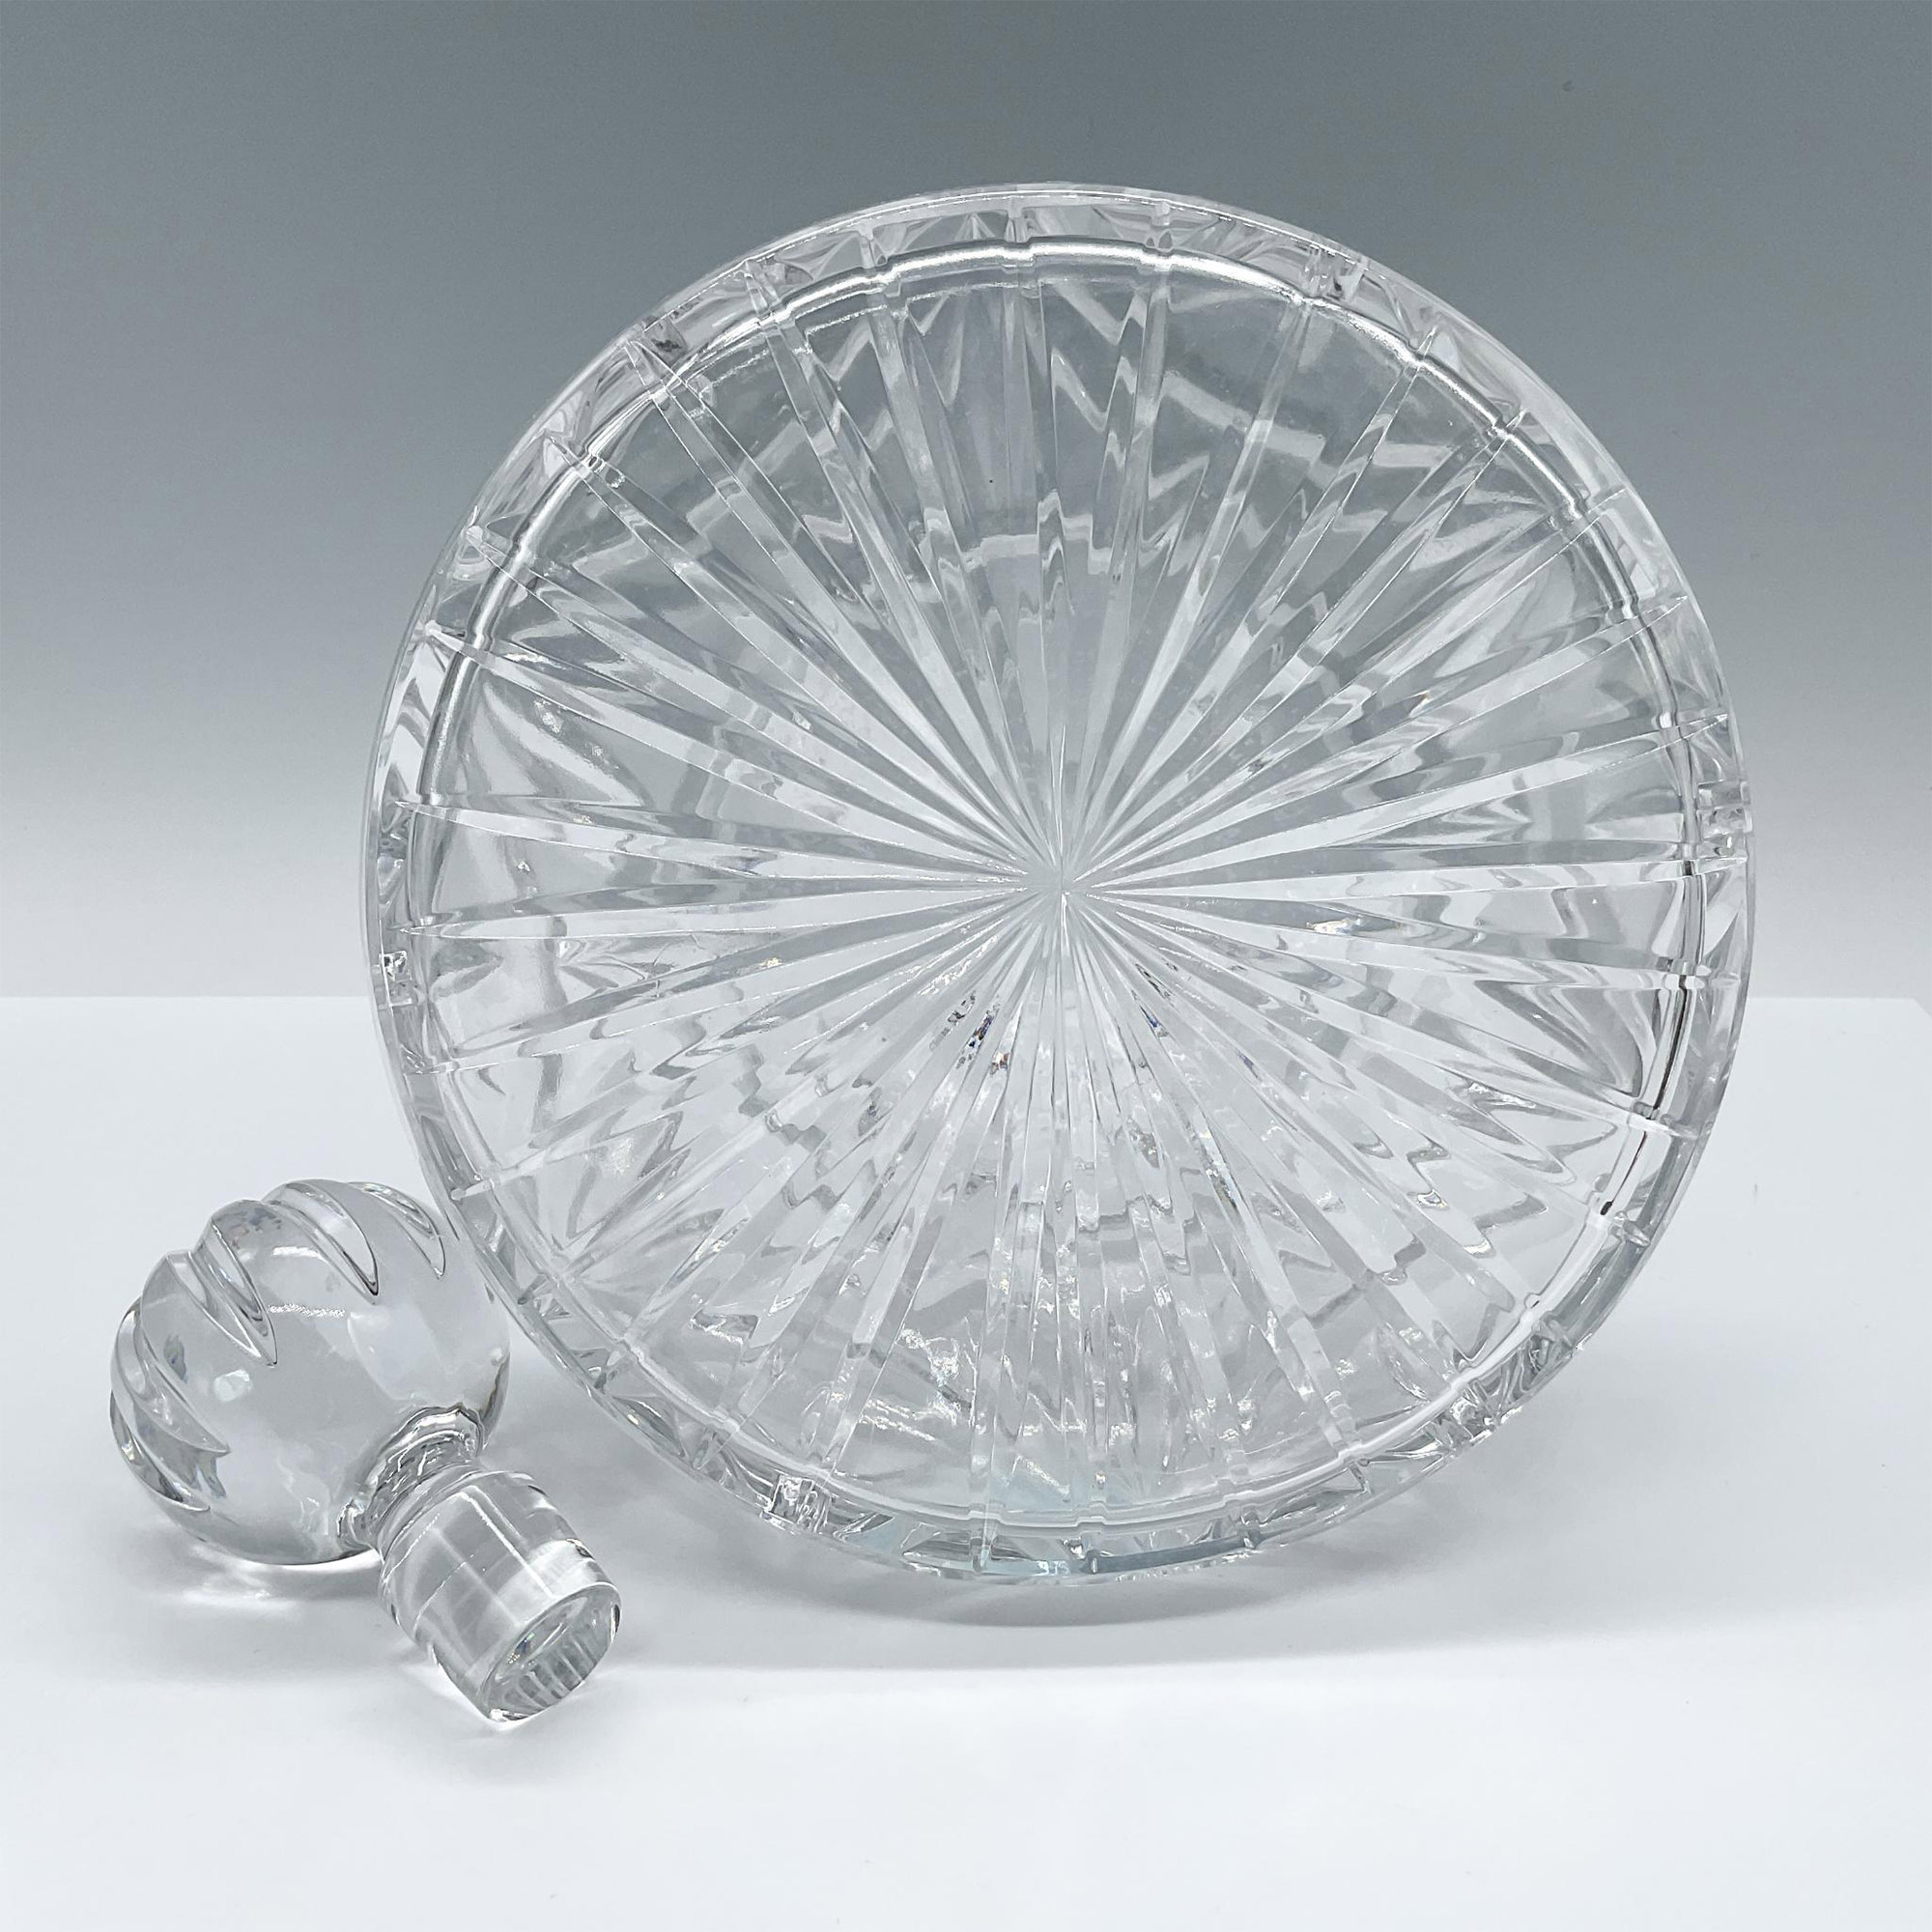 Towle Crystal Ship's Decanter - Image 3 of 3